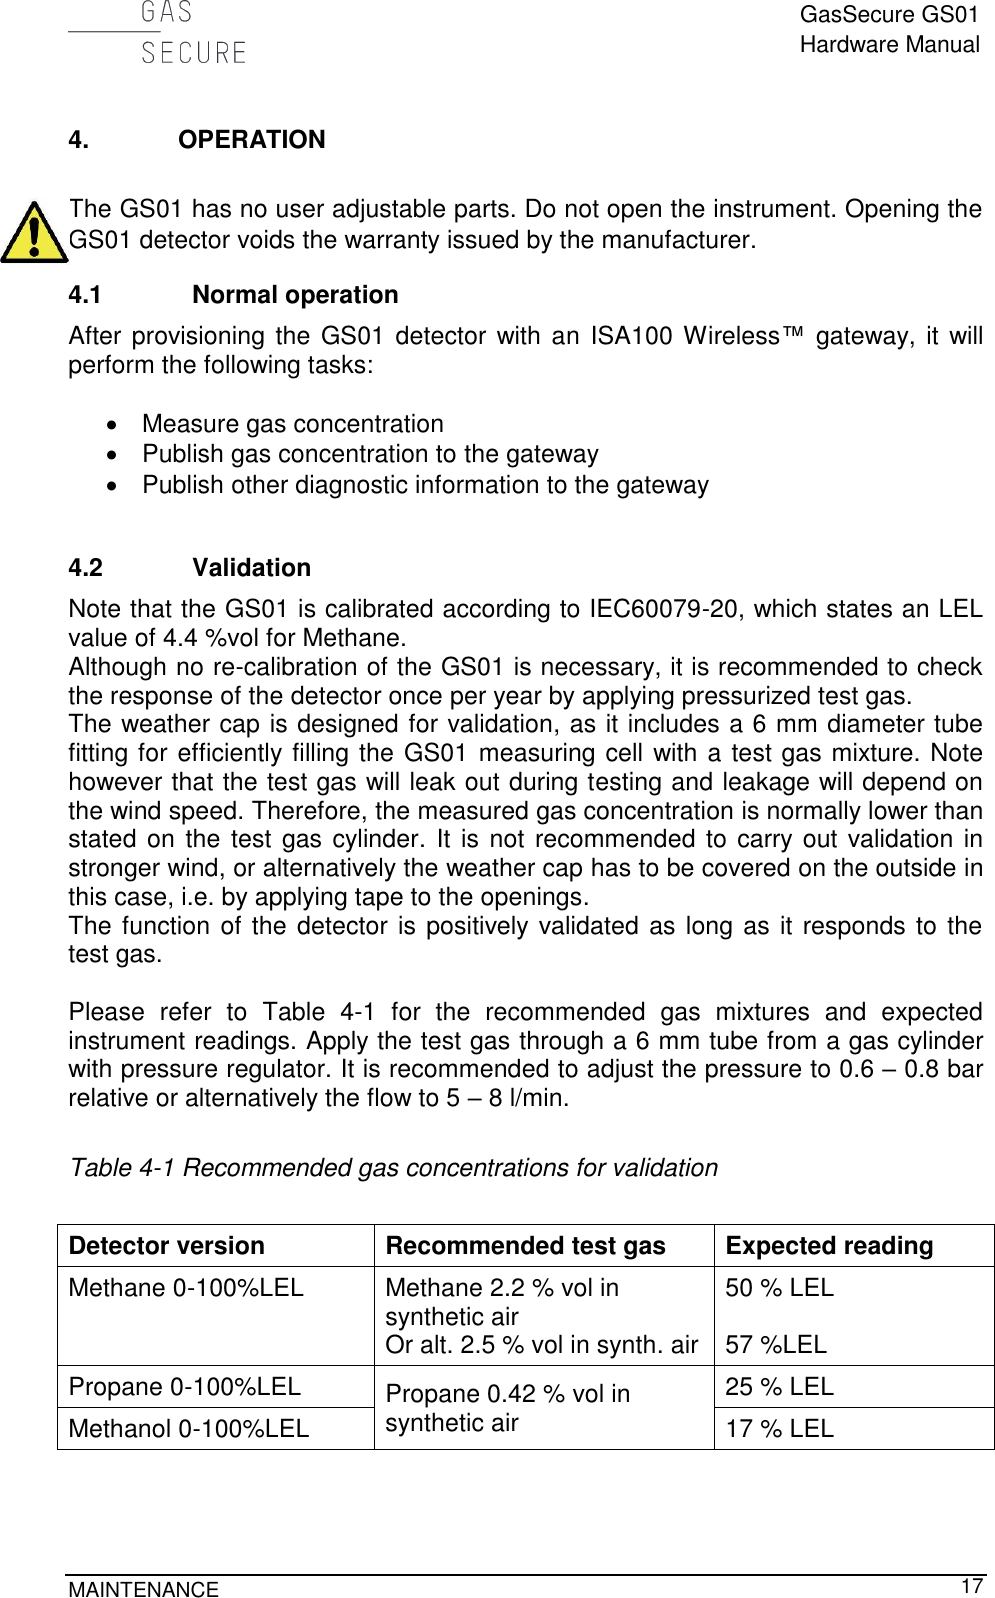  GasSecure GS01 Hardware Manual  MAINTENANCE     17 4. OPERATION  The GS01 has no user adjustable parts. Do not open the instrument. Opening the GS01 detector voids the warranty issued by the manufacturer. 4.1 Normal operation After  provisioning  the GS01 detector with an ISA100 Wireless™  gateway, it will perform the following tasks:     Measure gas concentration   Publish gas concentration to the gateway   Publish other diagnostic information to the gateway  4.2 Validation Note that the GS01 is calibrated according to IEC60079-20, which states an LEL value of 4.4 %vol for Methane. Although no re-calibration of the GS01 is necessary, it is recommended to check the response of the detector once per year by applying pressurized test gas.  The weather cap is designed for validation, as it includes a 6 mm diameter tube fitting for efficiently filling the GS01 measuring cell with a test gas mixture. Note however that the test gas will leak out during testing and leakage will depend on the wind speed. Therefore, the measured gas concentration is normally lower than stated on the  test gas cylinder. It is not recommended to carry out validation in stronger wind, or alternatively the weather cap has to be covered on the outside in this case, i.e. by applying tape to the openings. The  function of the detector is positively validated as long as it responds to the test gas.  Please  refer  to  Table  4-1  for  the  recommended  gas  mixtures  and  expected instrument readings. Apply the test gas through a 6 mm tube from a gas cylinder with pressure regulator. It is recommended to adjust the pressure to 0.6 – 0.8 bar relative or alternatively the flow to 5 – 8 l/min.  Table 4-1 Recommended gas concentrations for validation  Detector version Recommended test gas Expected reading Methane 0-100%LEL Methane 2.2 % vol in synthetic air Or alt. 2.5 % vol in synth. air 50 % LEL  57 %LEL Propane 0-100%LEL Propane 0.42 % vol in synthetic air 25 % LEL Methanol 0-100%LEL 17 % LEL   